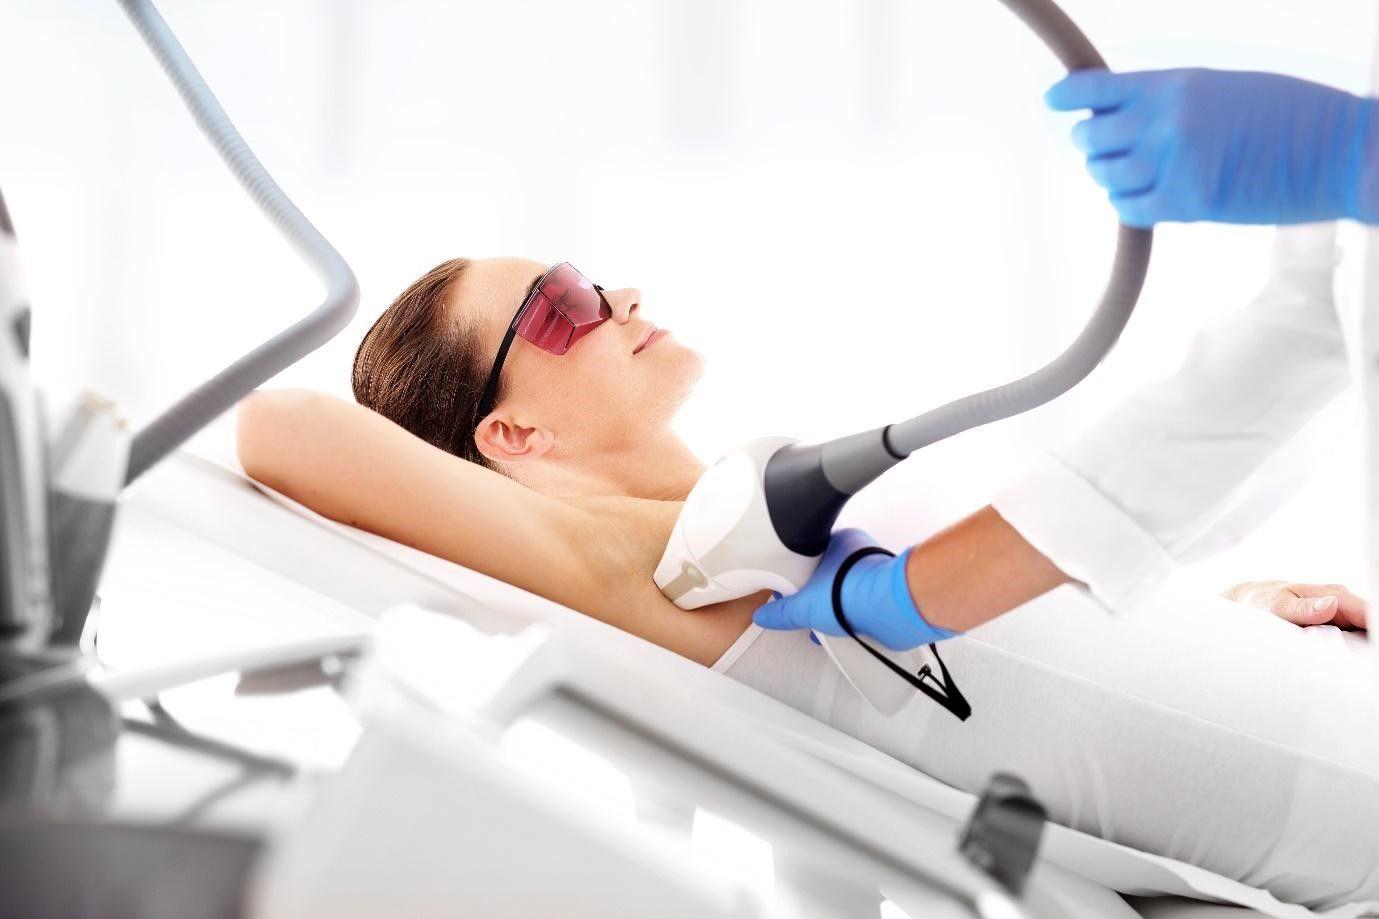  laser hair removal session